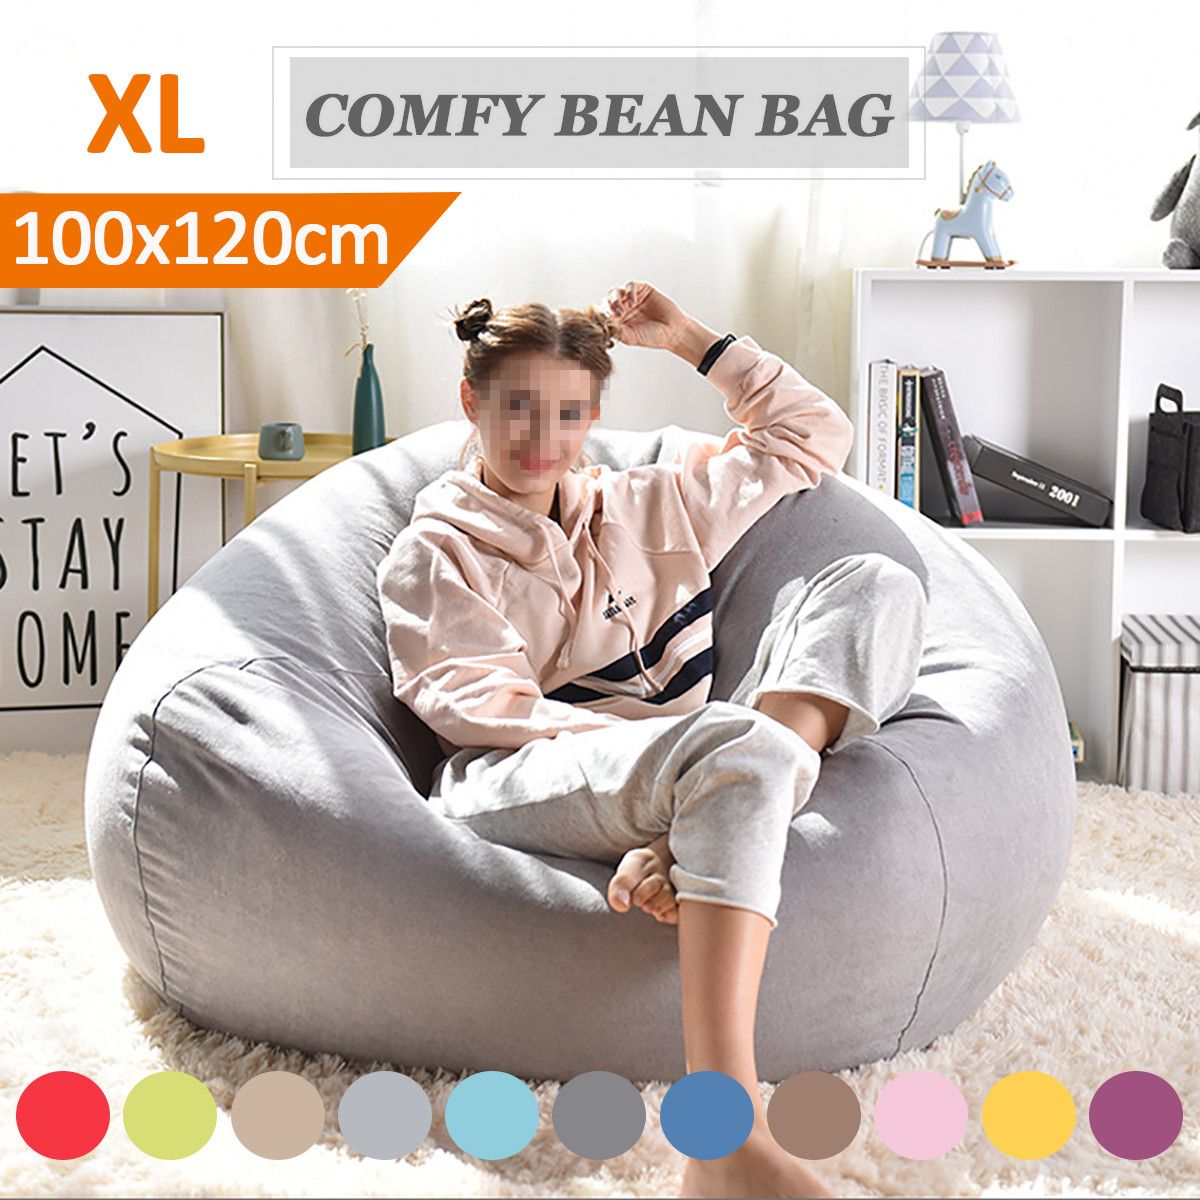 Mollismoons Bean Bag Fur Bean Bag Sofa Without Beans Very Attractive &  Luxury Fur & Leather